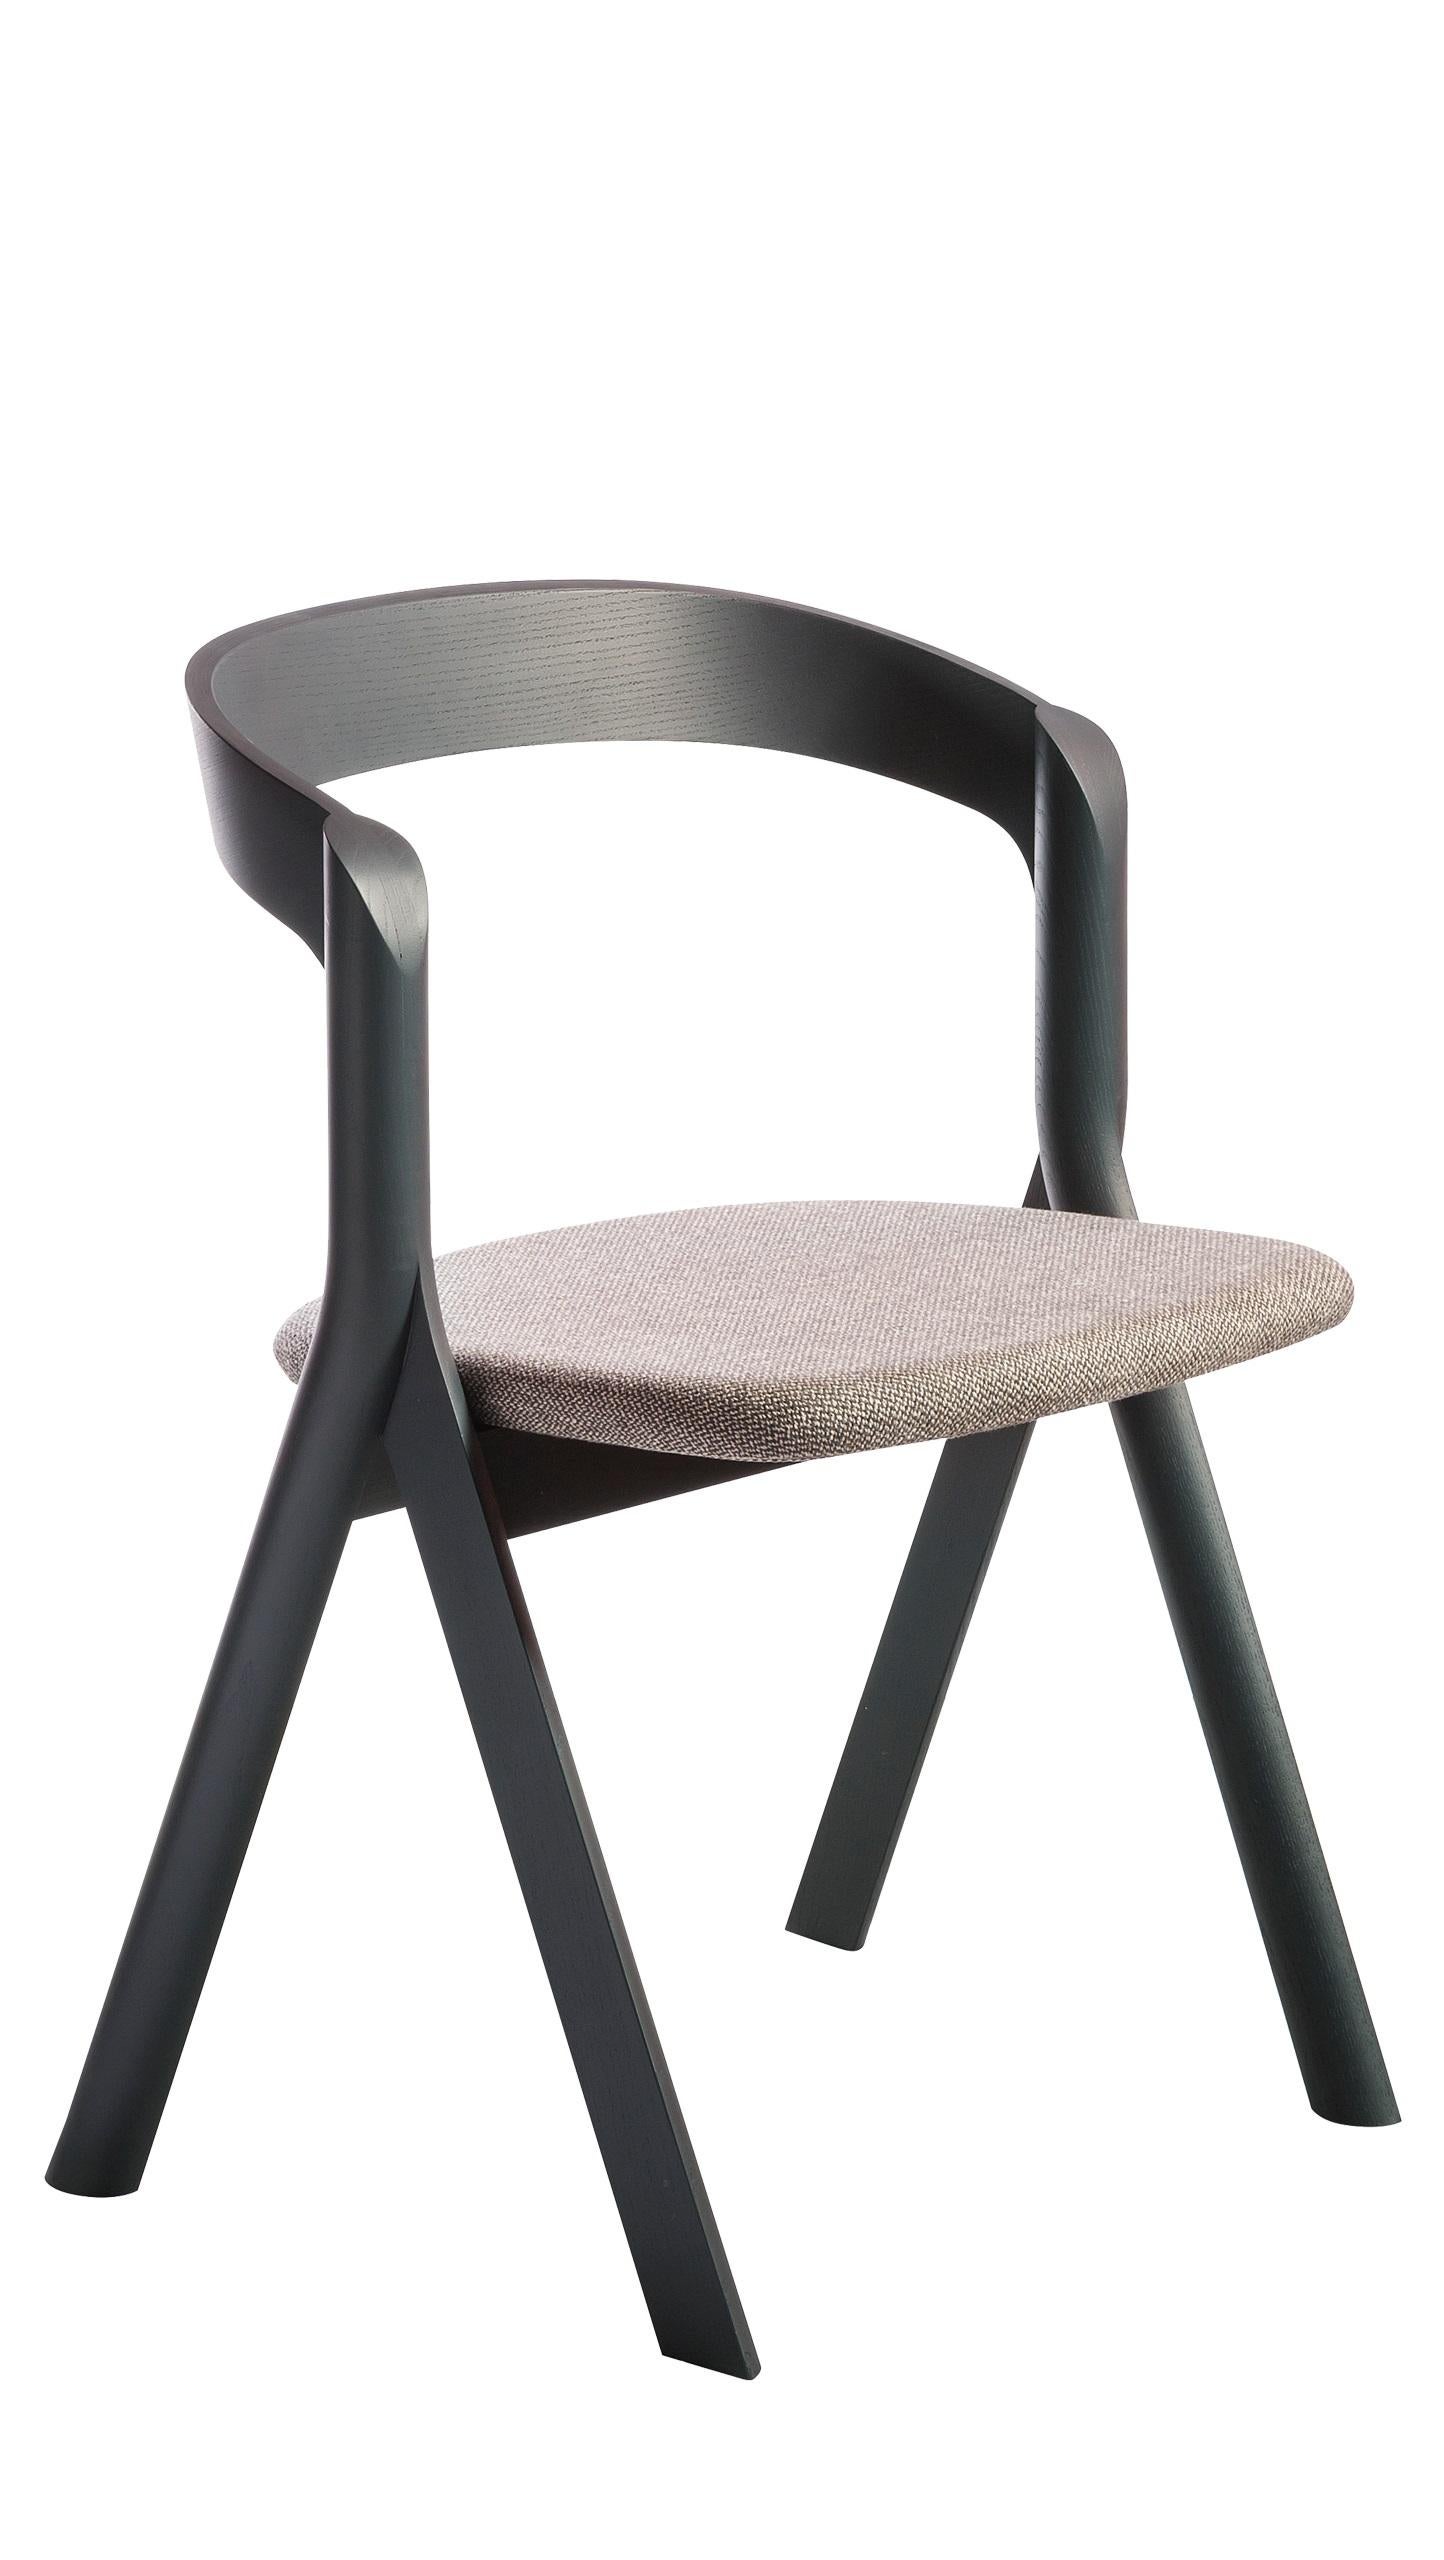 For Sale: White (Anthracite Ash) Diverge Chair in Wood Structure, Dove Gray Cushion, by Skrivo Design